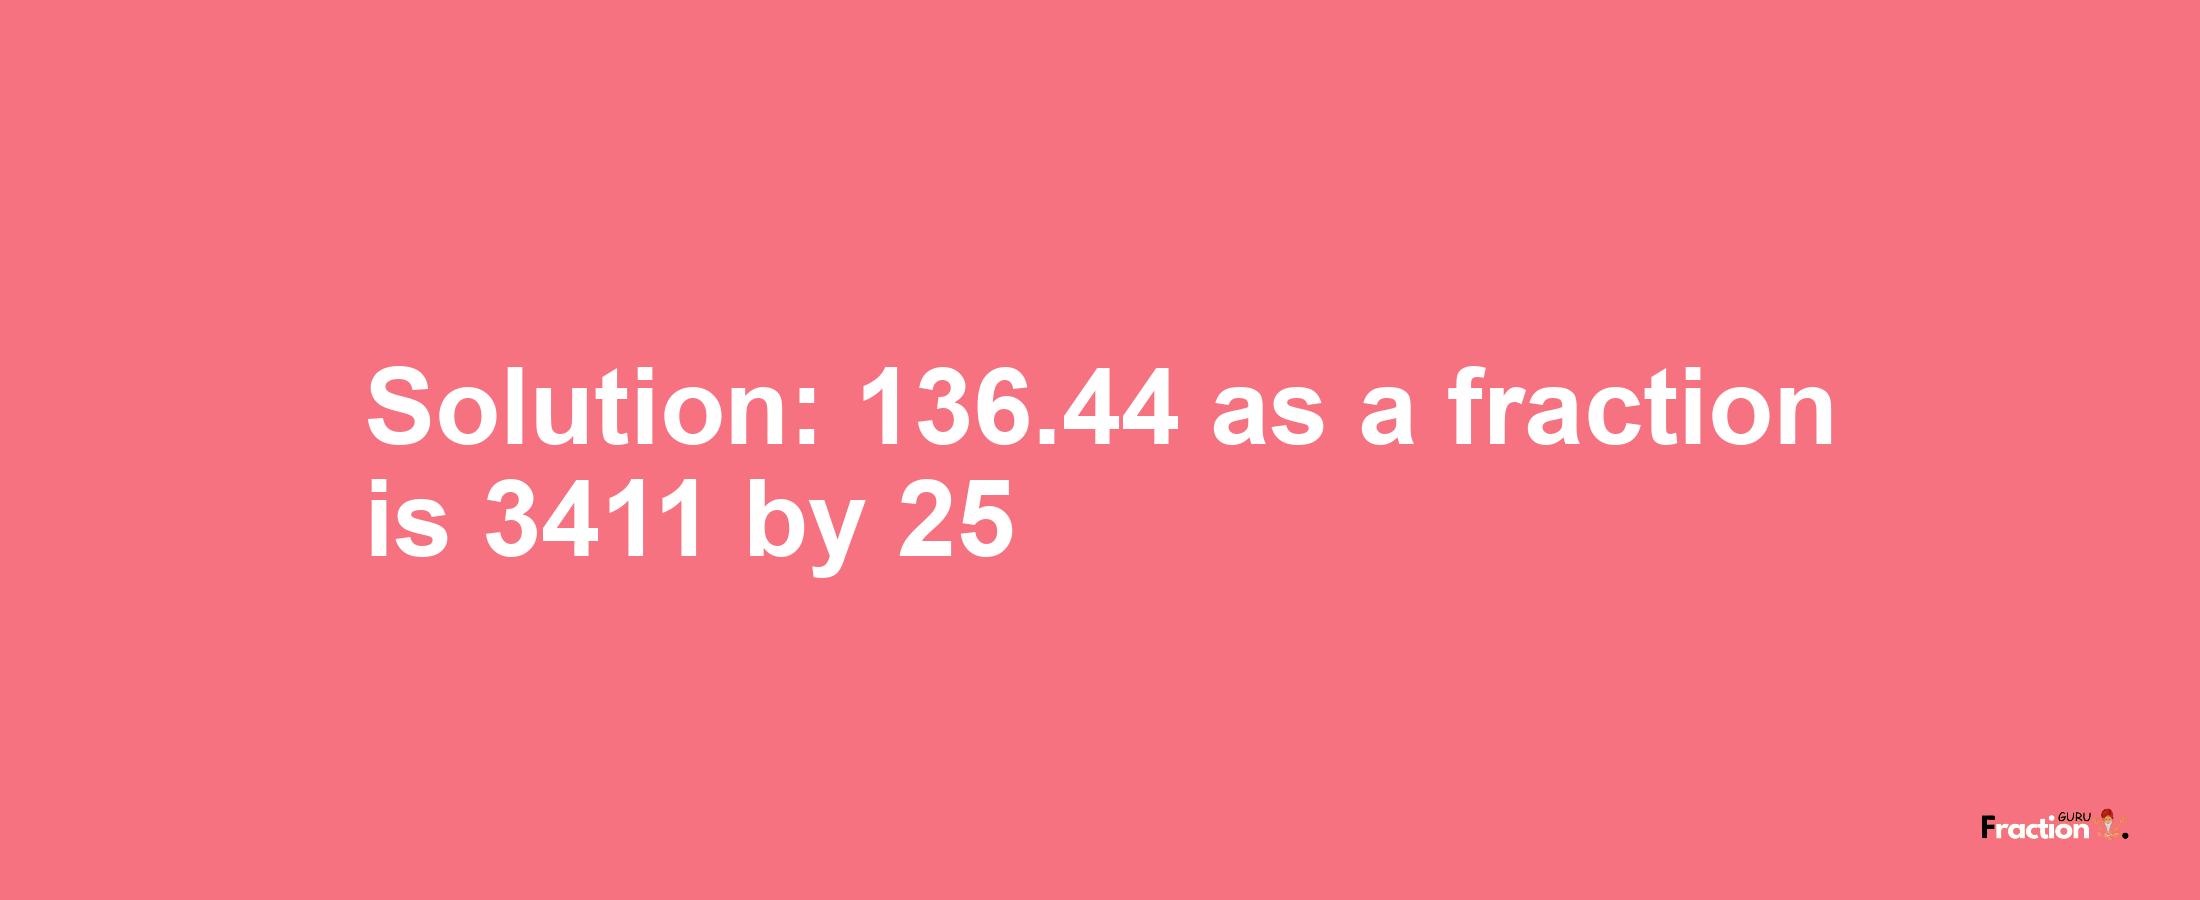 Solution:136.44 as a fraction is 3411/25